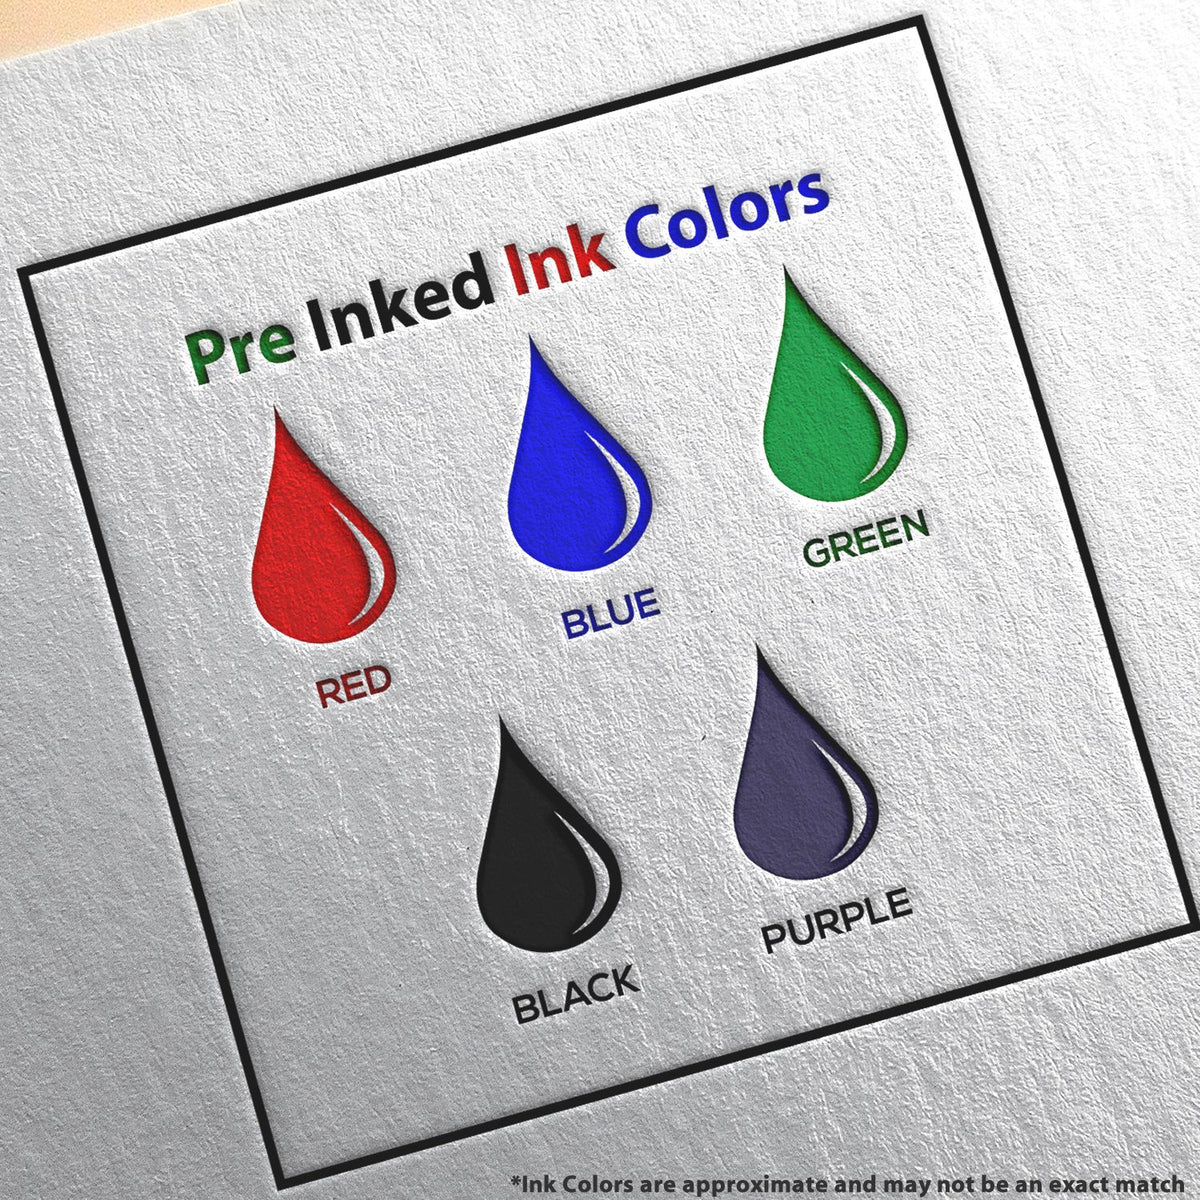 A picture showing the different ink colors or hues available for the Premium MaxLight Pre-Inked Pennsylvania Landscape Architectural Stamp product.